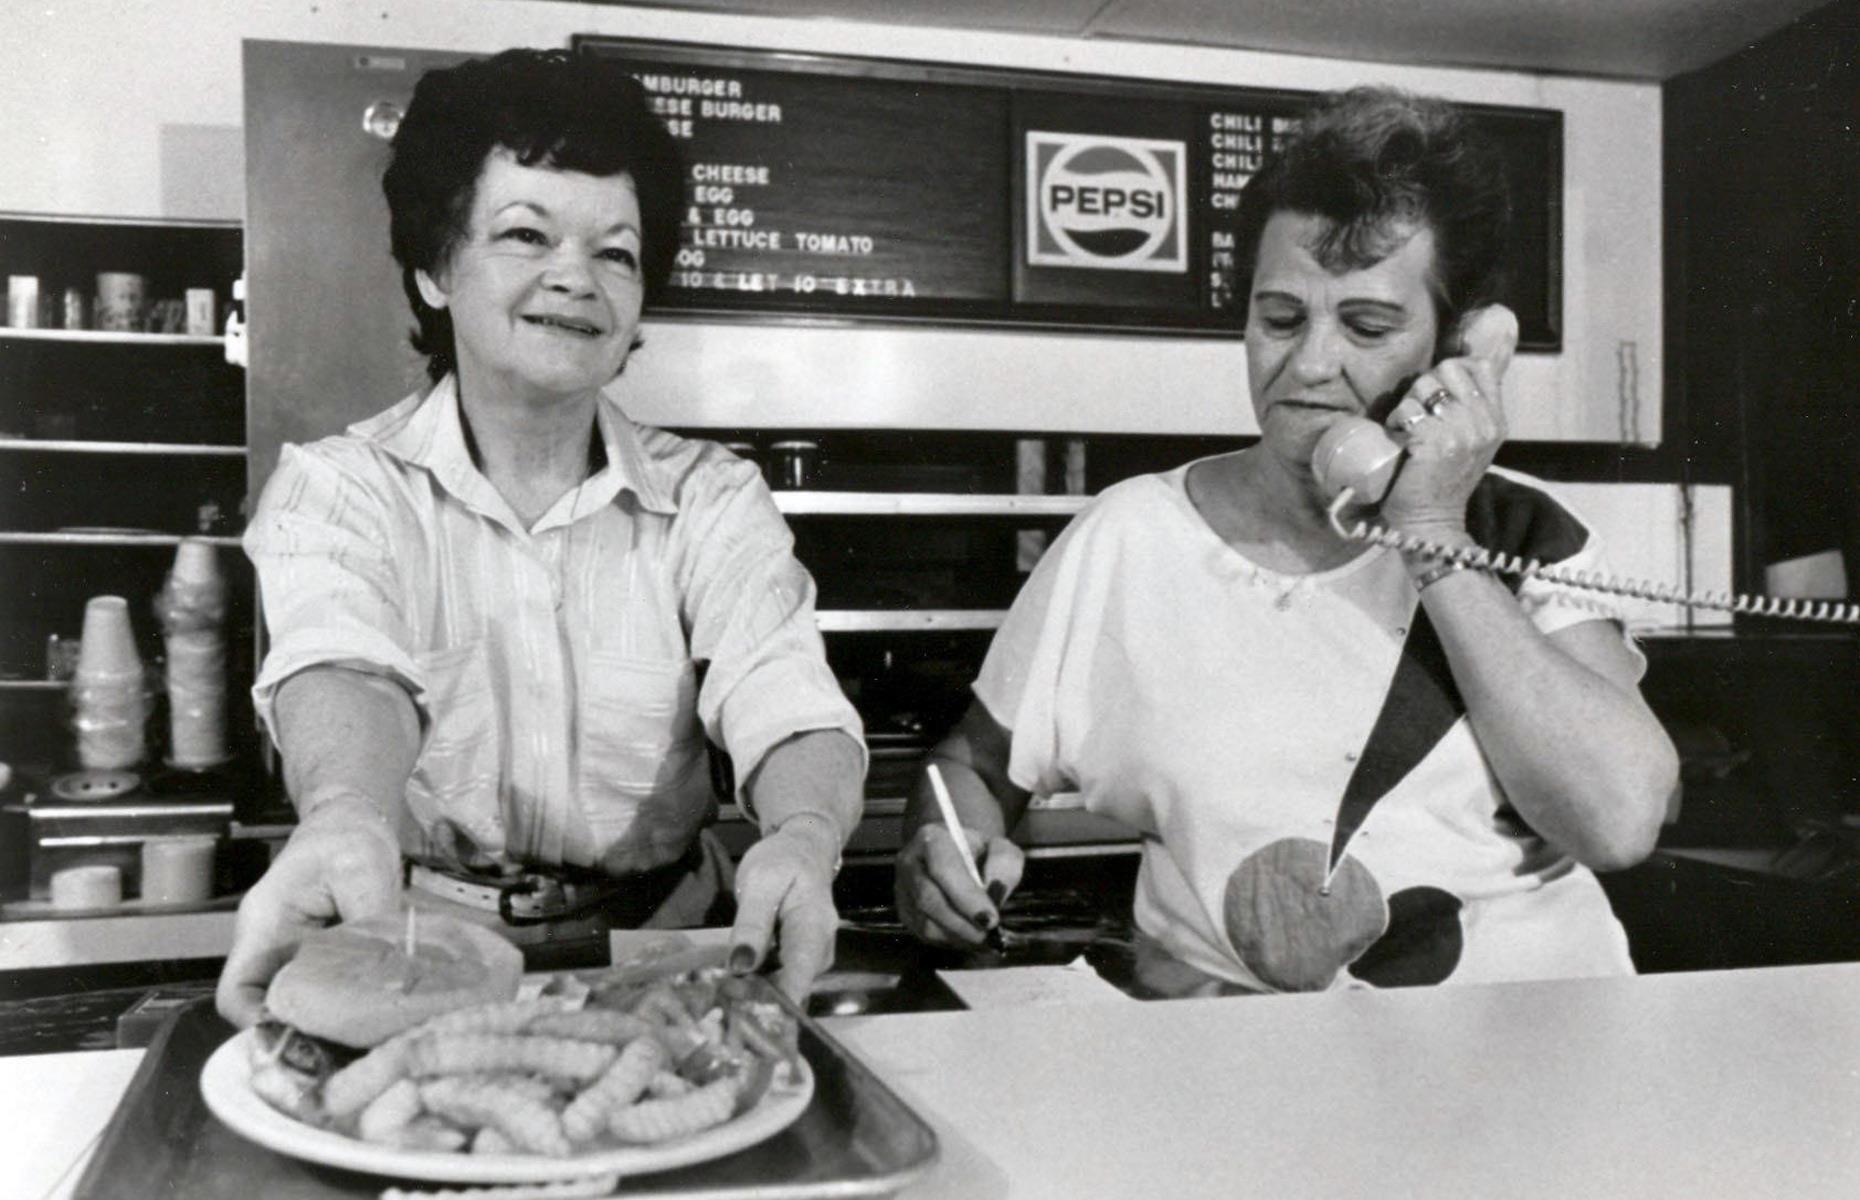 <p>A major part of the Goody Goody story, Yvonne Freeman (pictured here, left) started out as a carhop for Goody Goody from 1947-49. After a 10-year hiatus, while she had her five sons, she returned as waiting staff in 1959. Yvonne took exclusive responsibility for making the Goody Goody burger's secret sauce, a recipe handed down unchanged from the Stephens years. She also made the delicious homemade pies herself. From 1985 to 2005, Freeman was manager of Goody Goody, although was better known as 'the queen of hamburgers'. </p>